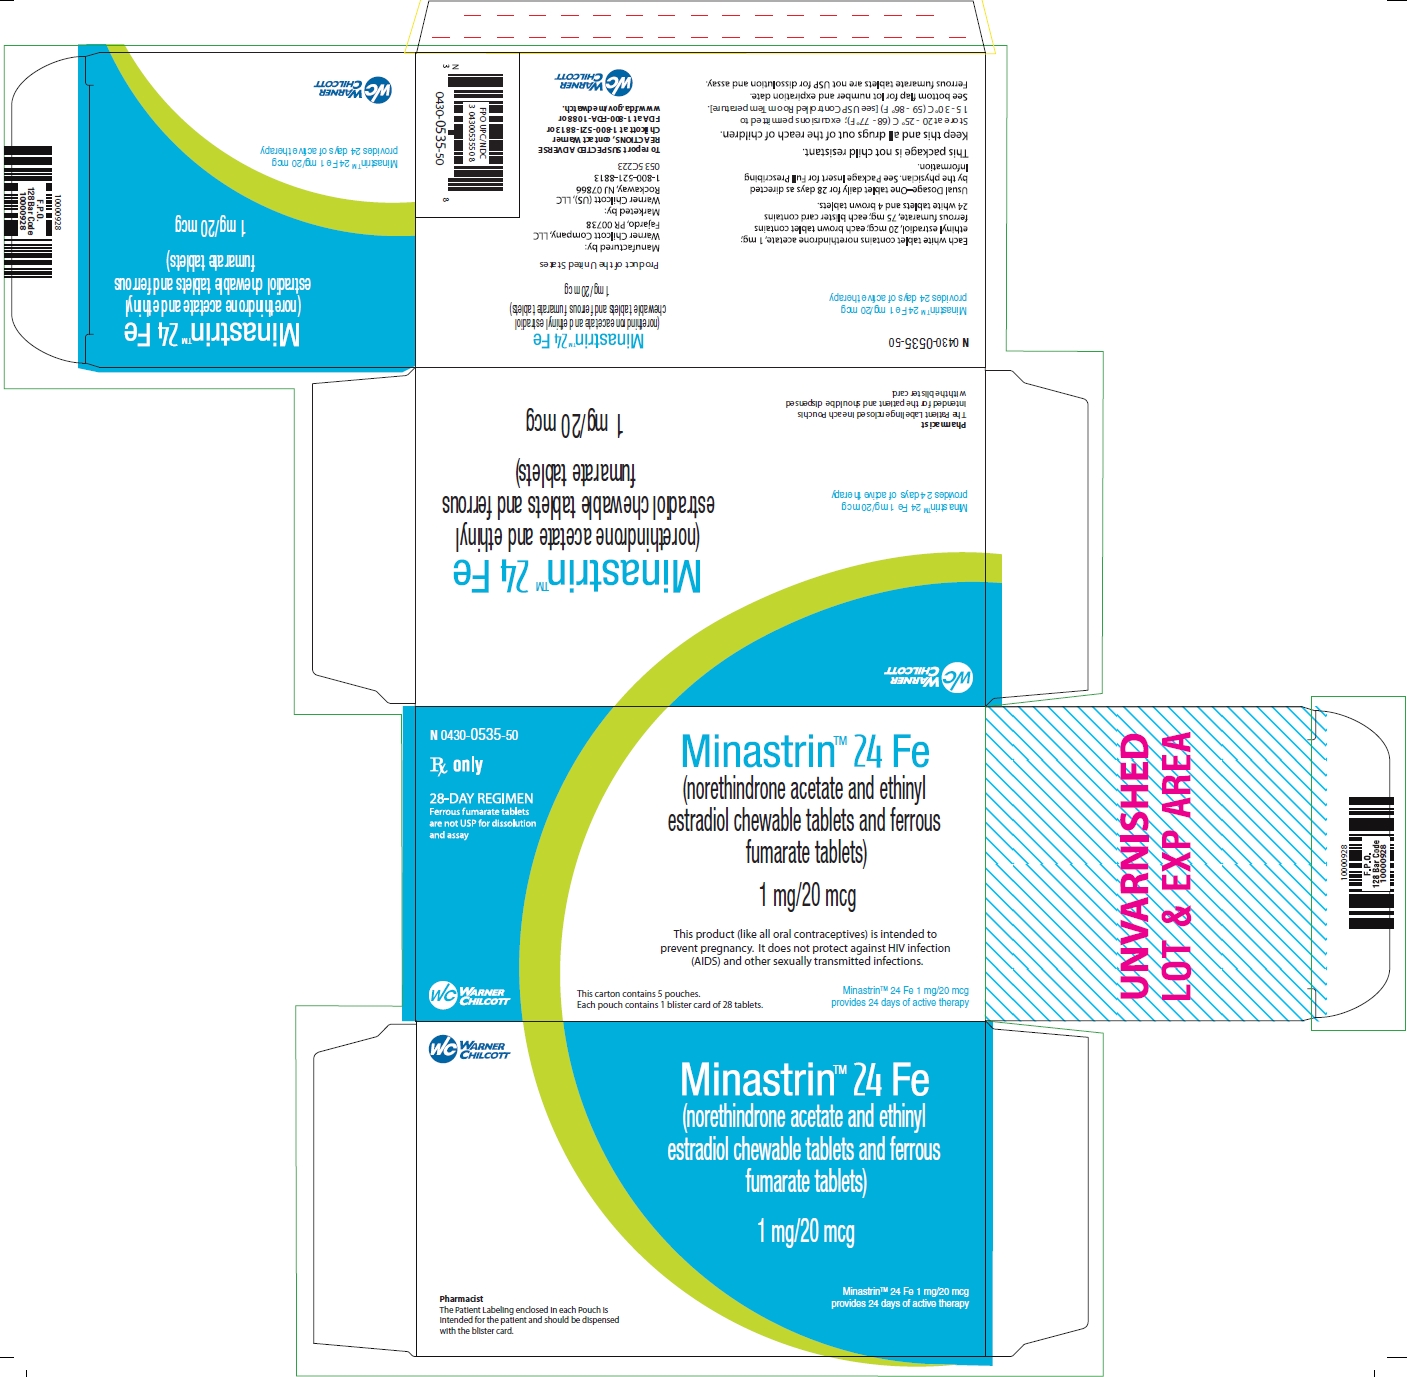 Minastrin(TM) 24 Fe (norethindrone acetate and ethinyl estradiol chewable tablets and ferrous fumarate tablets) label